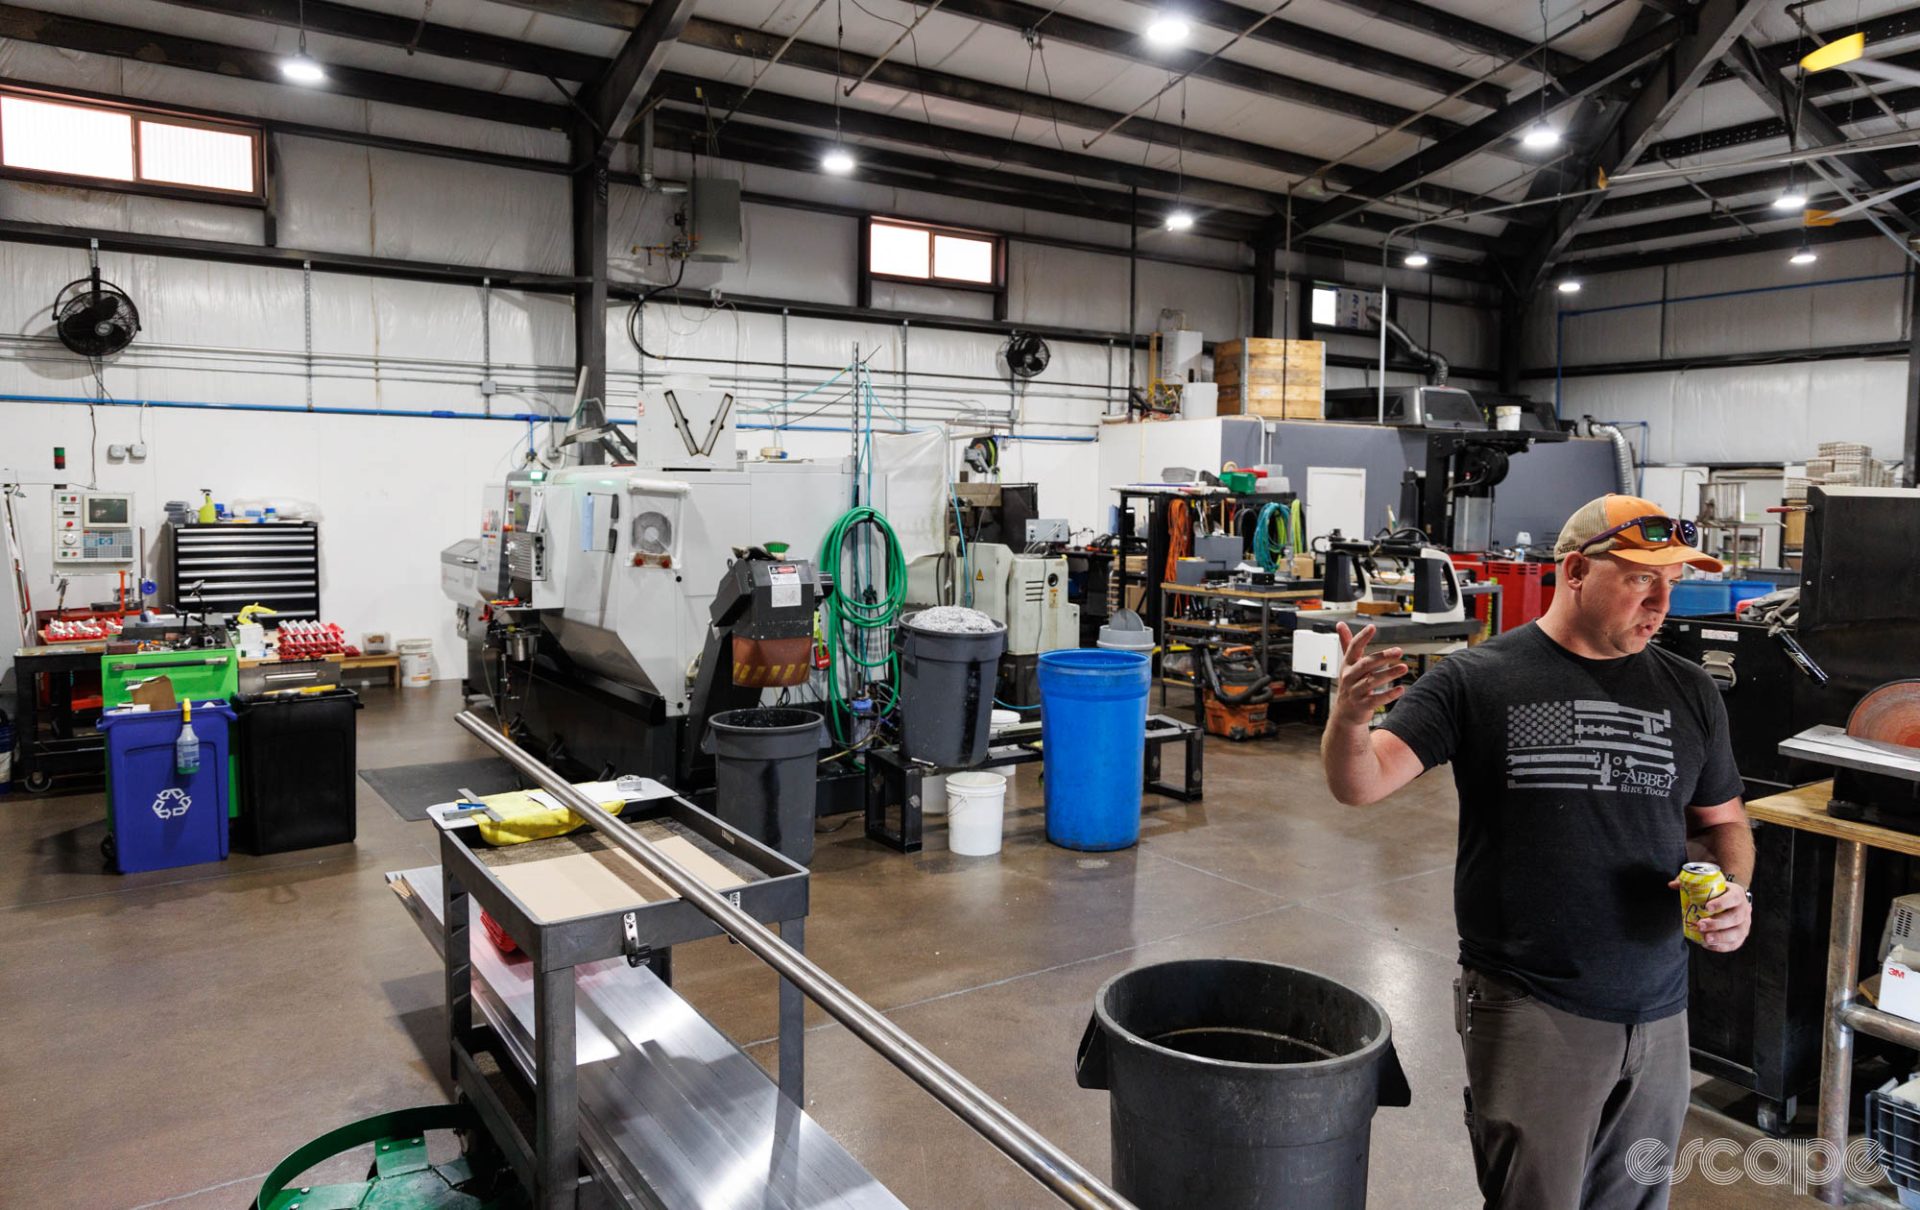 Jason Quade stands on the shop floor, which is compact and packed with machine tools under a tall ceiling. High windows let in some natural light.